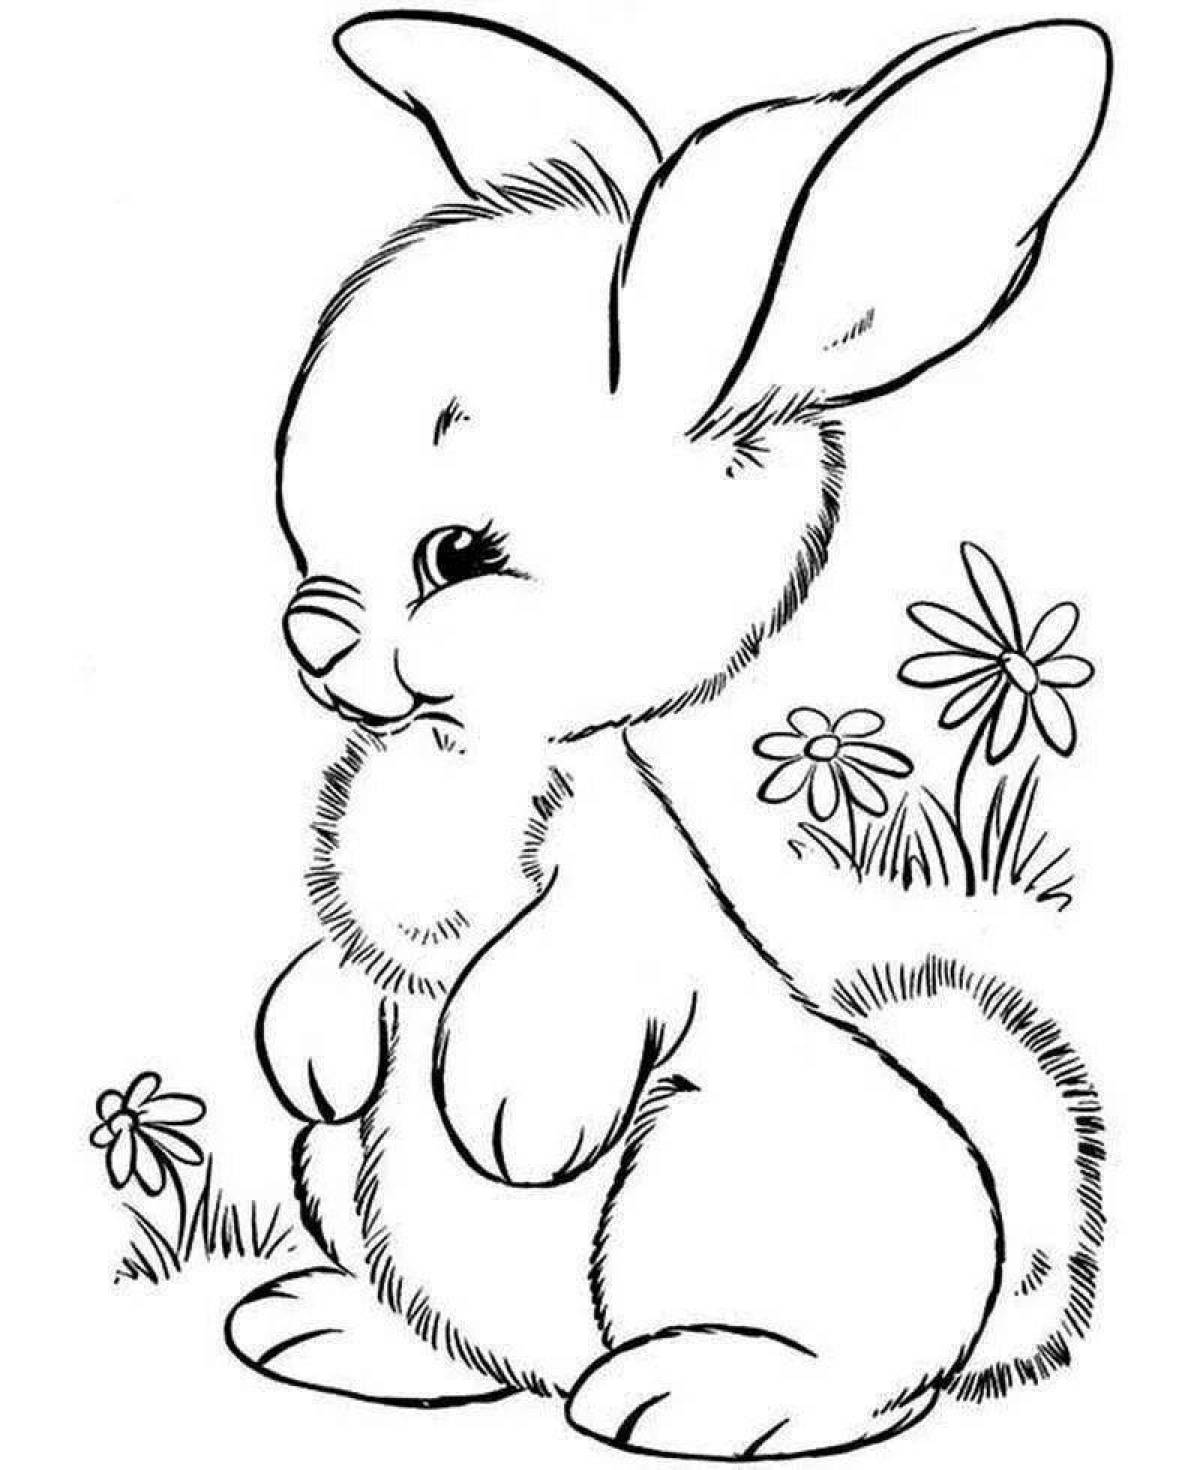 Glitter Bunny Coloring Page for 6-7 year olds